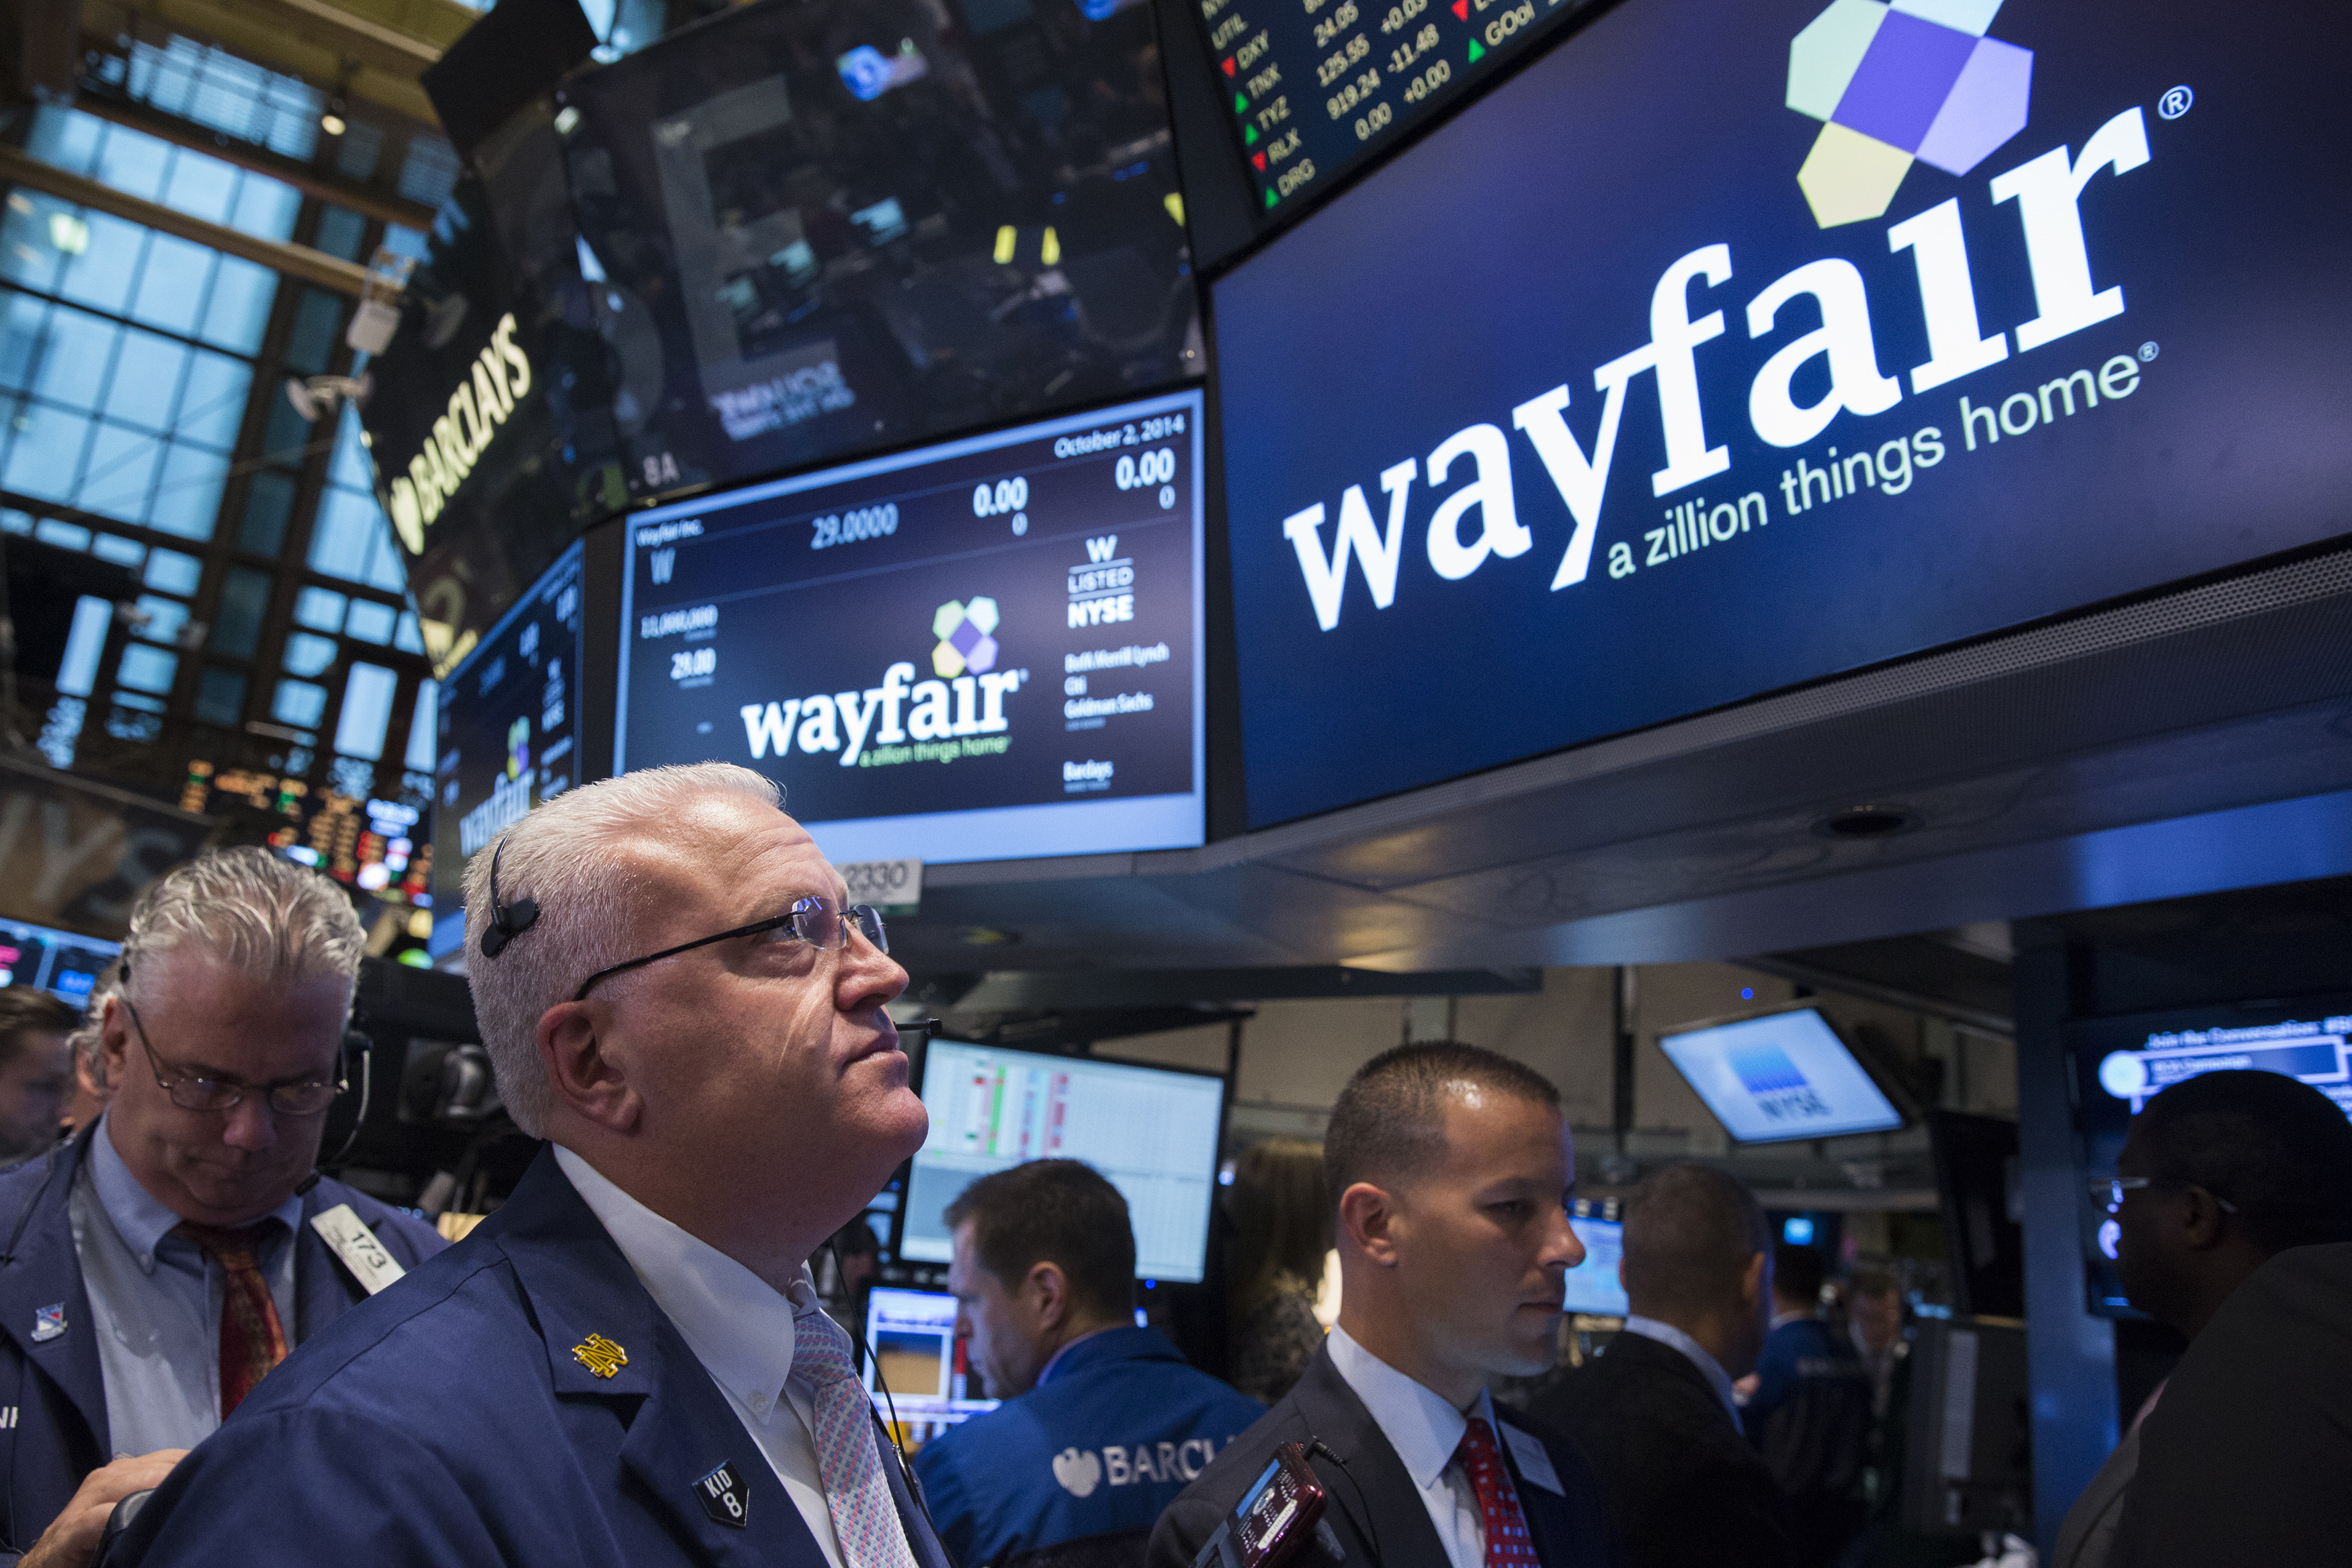 Traders wait for the Wayfair IPO on the floor of the New York Stock Exchange